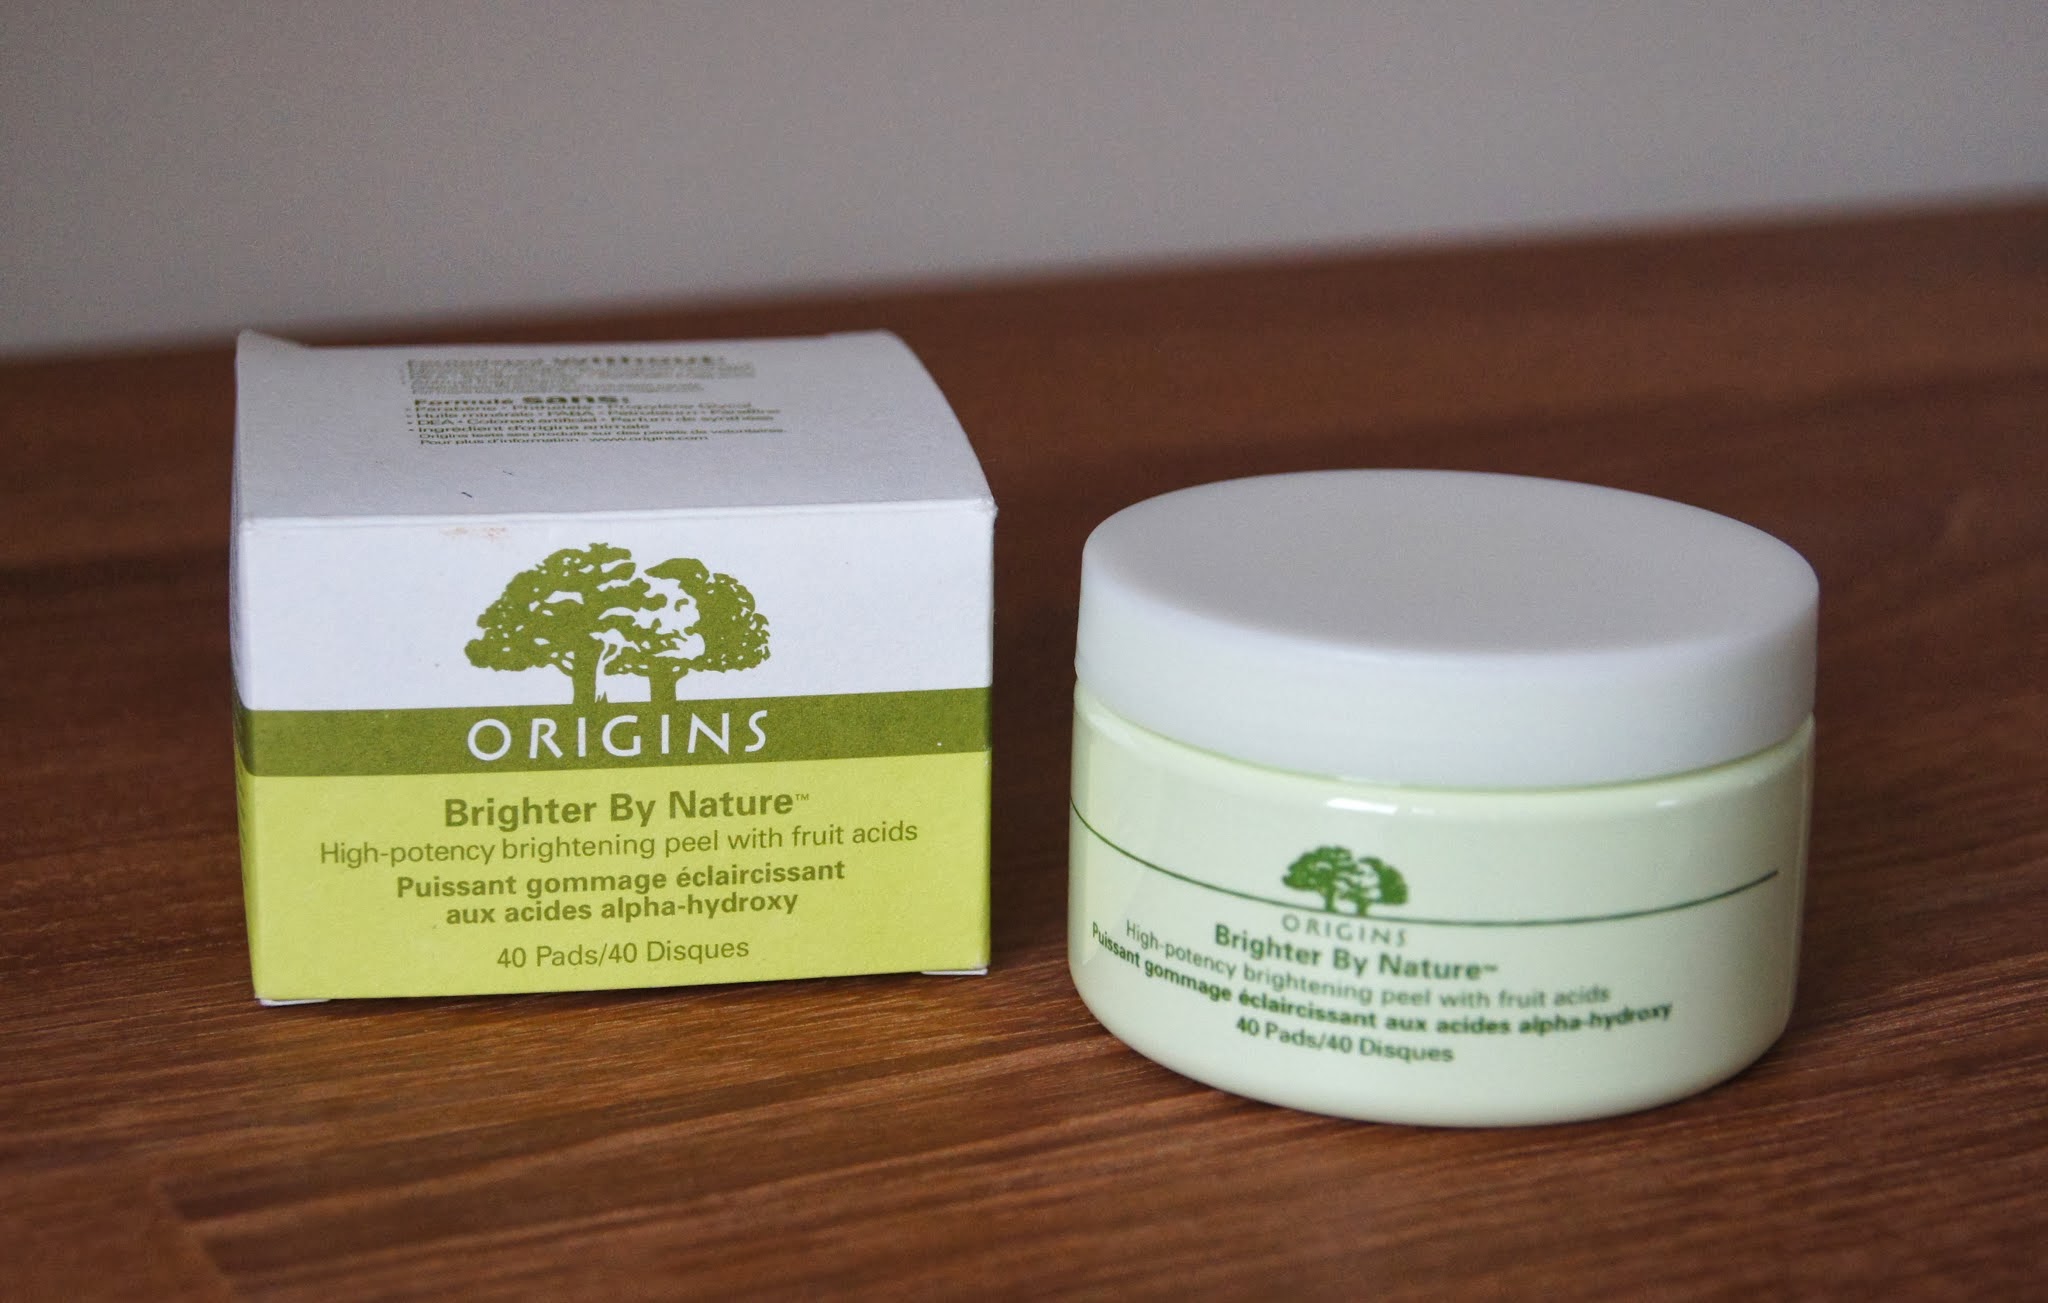 Origins Brighter By Nature High Potency Brightening Peel Pads review exfoliating